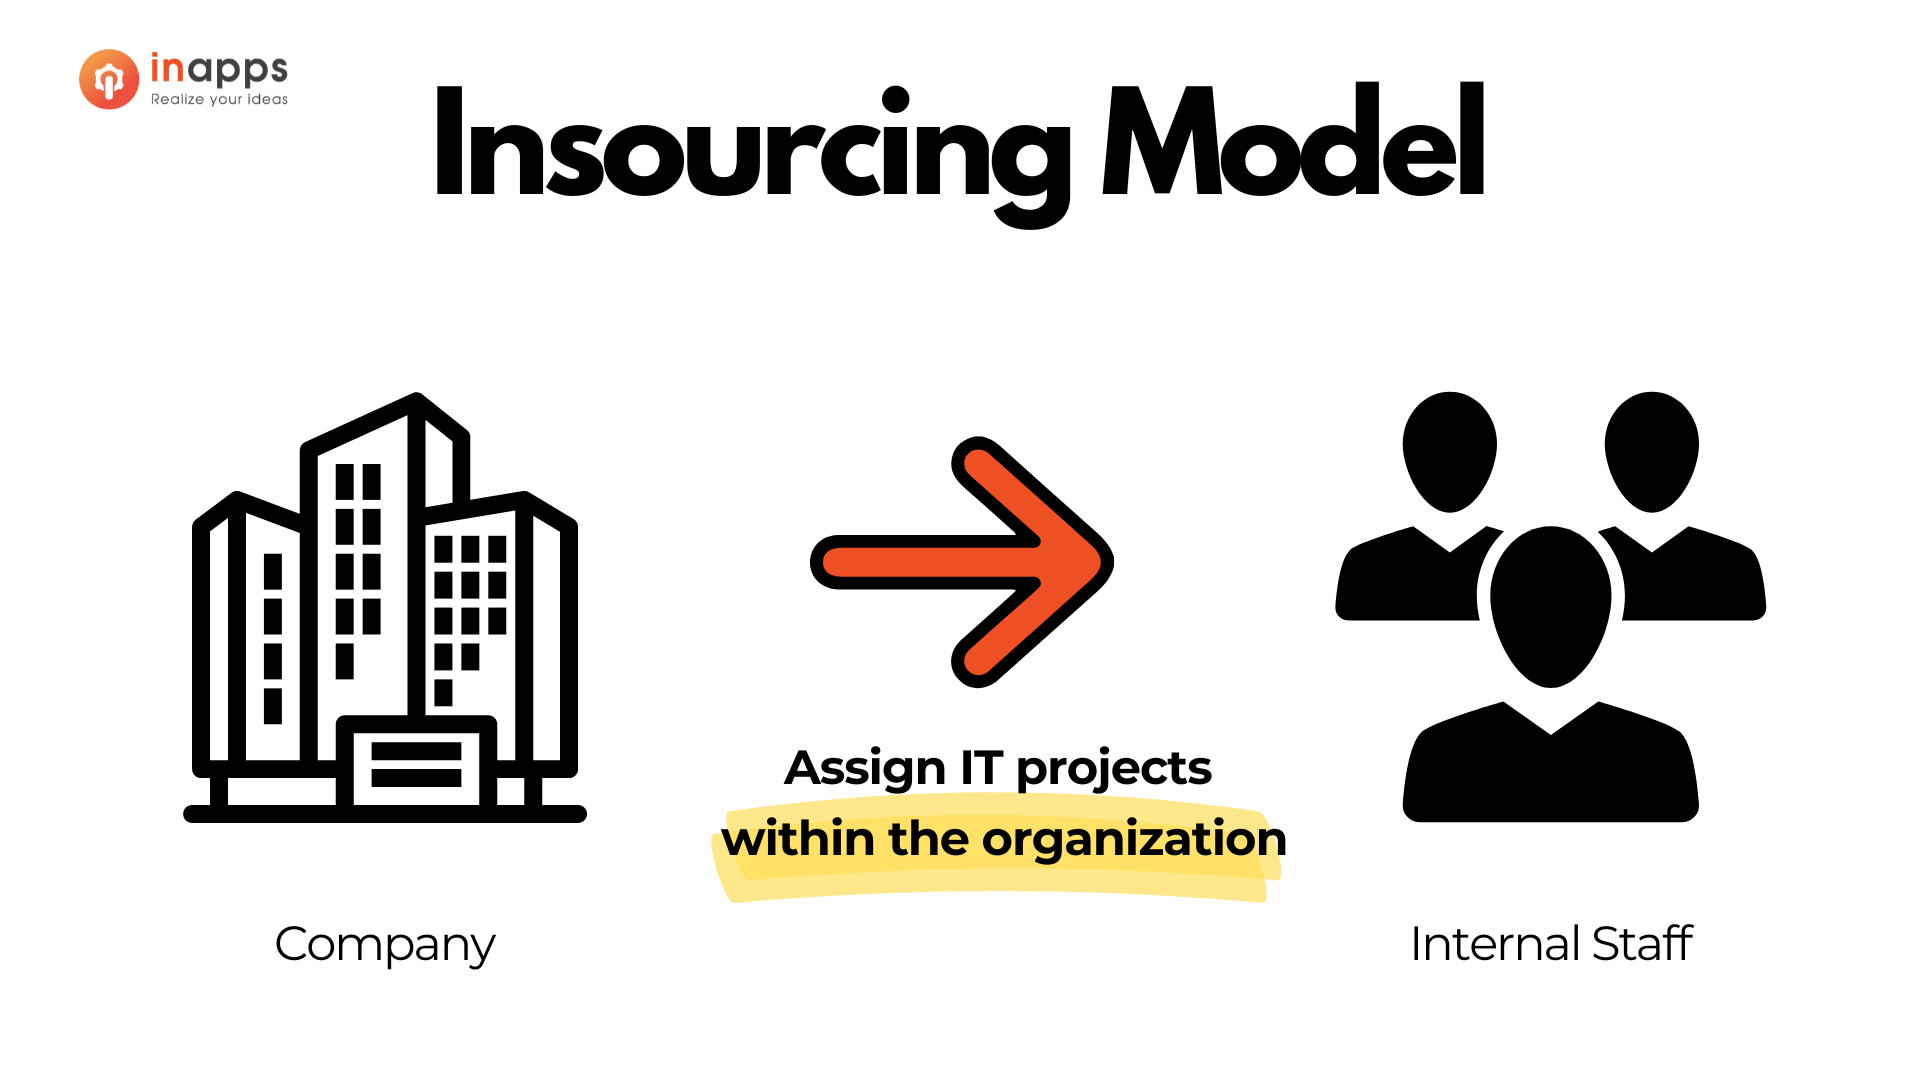 insourcing models - InApps